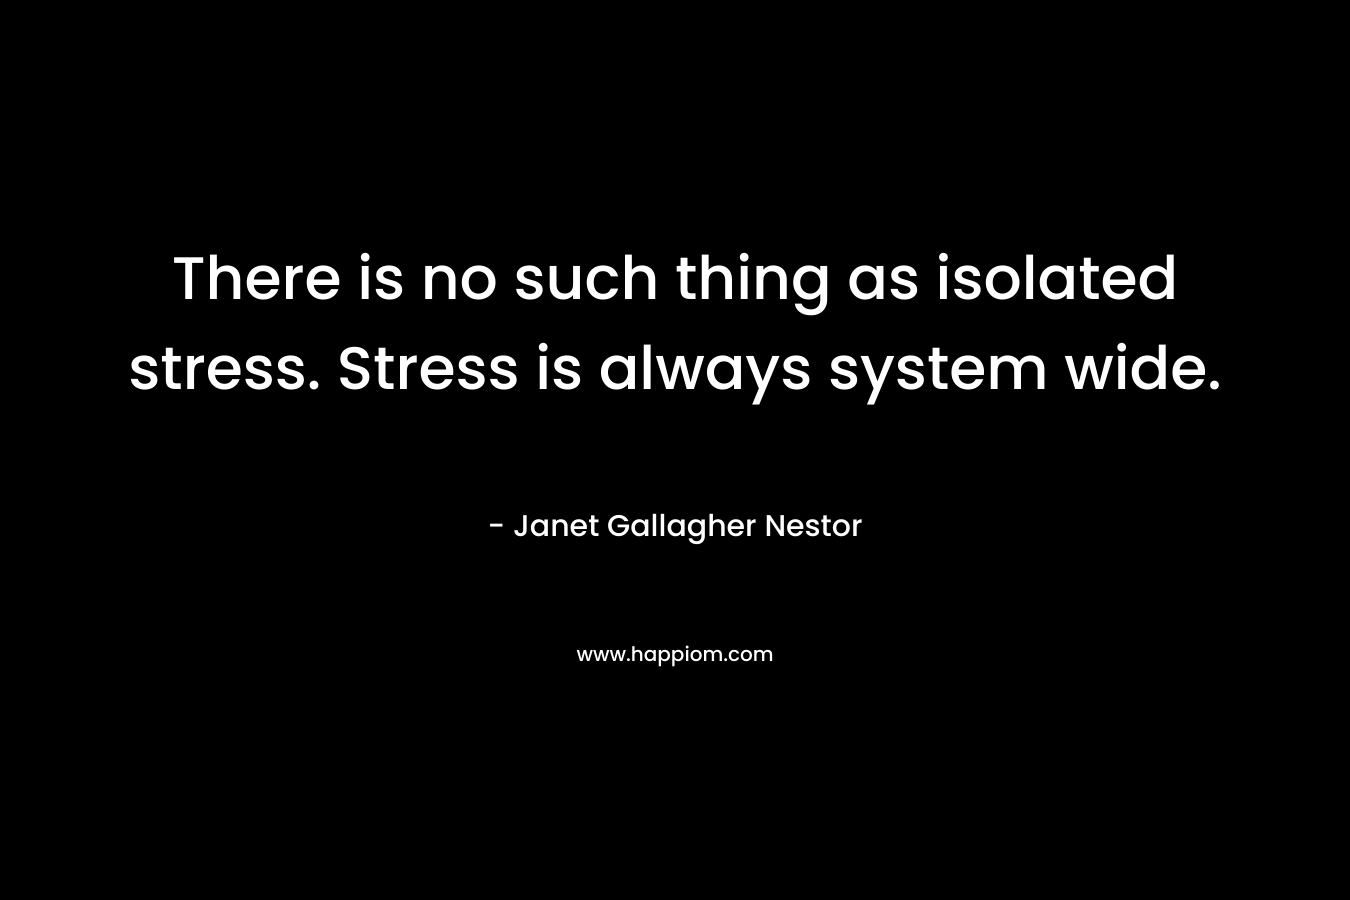 There is no such thing as isolated stress. Stress is always system wide.